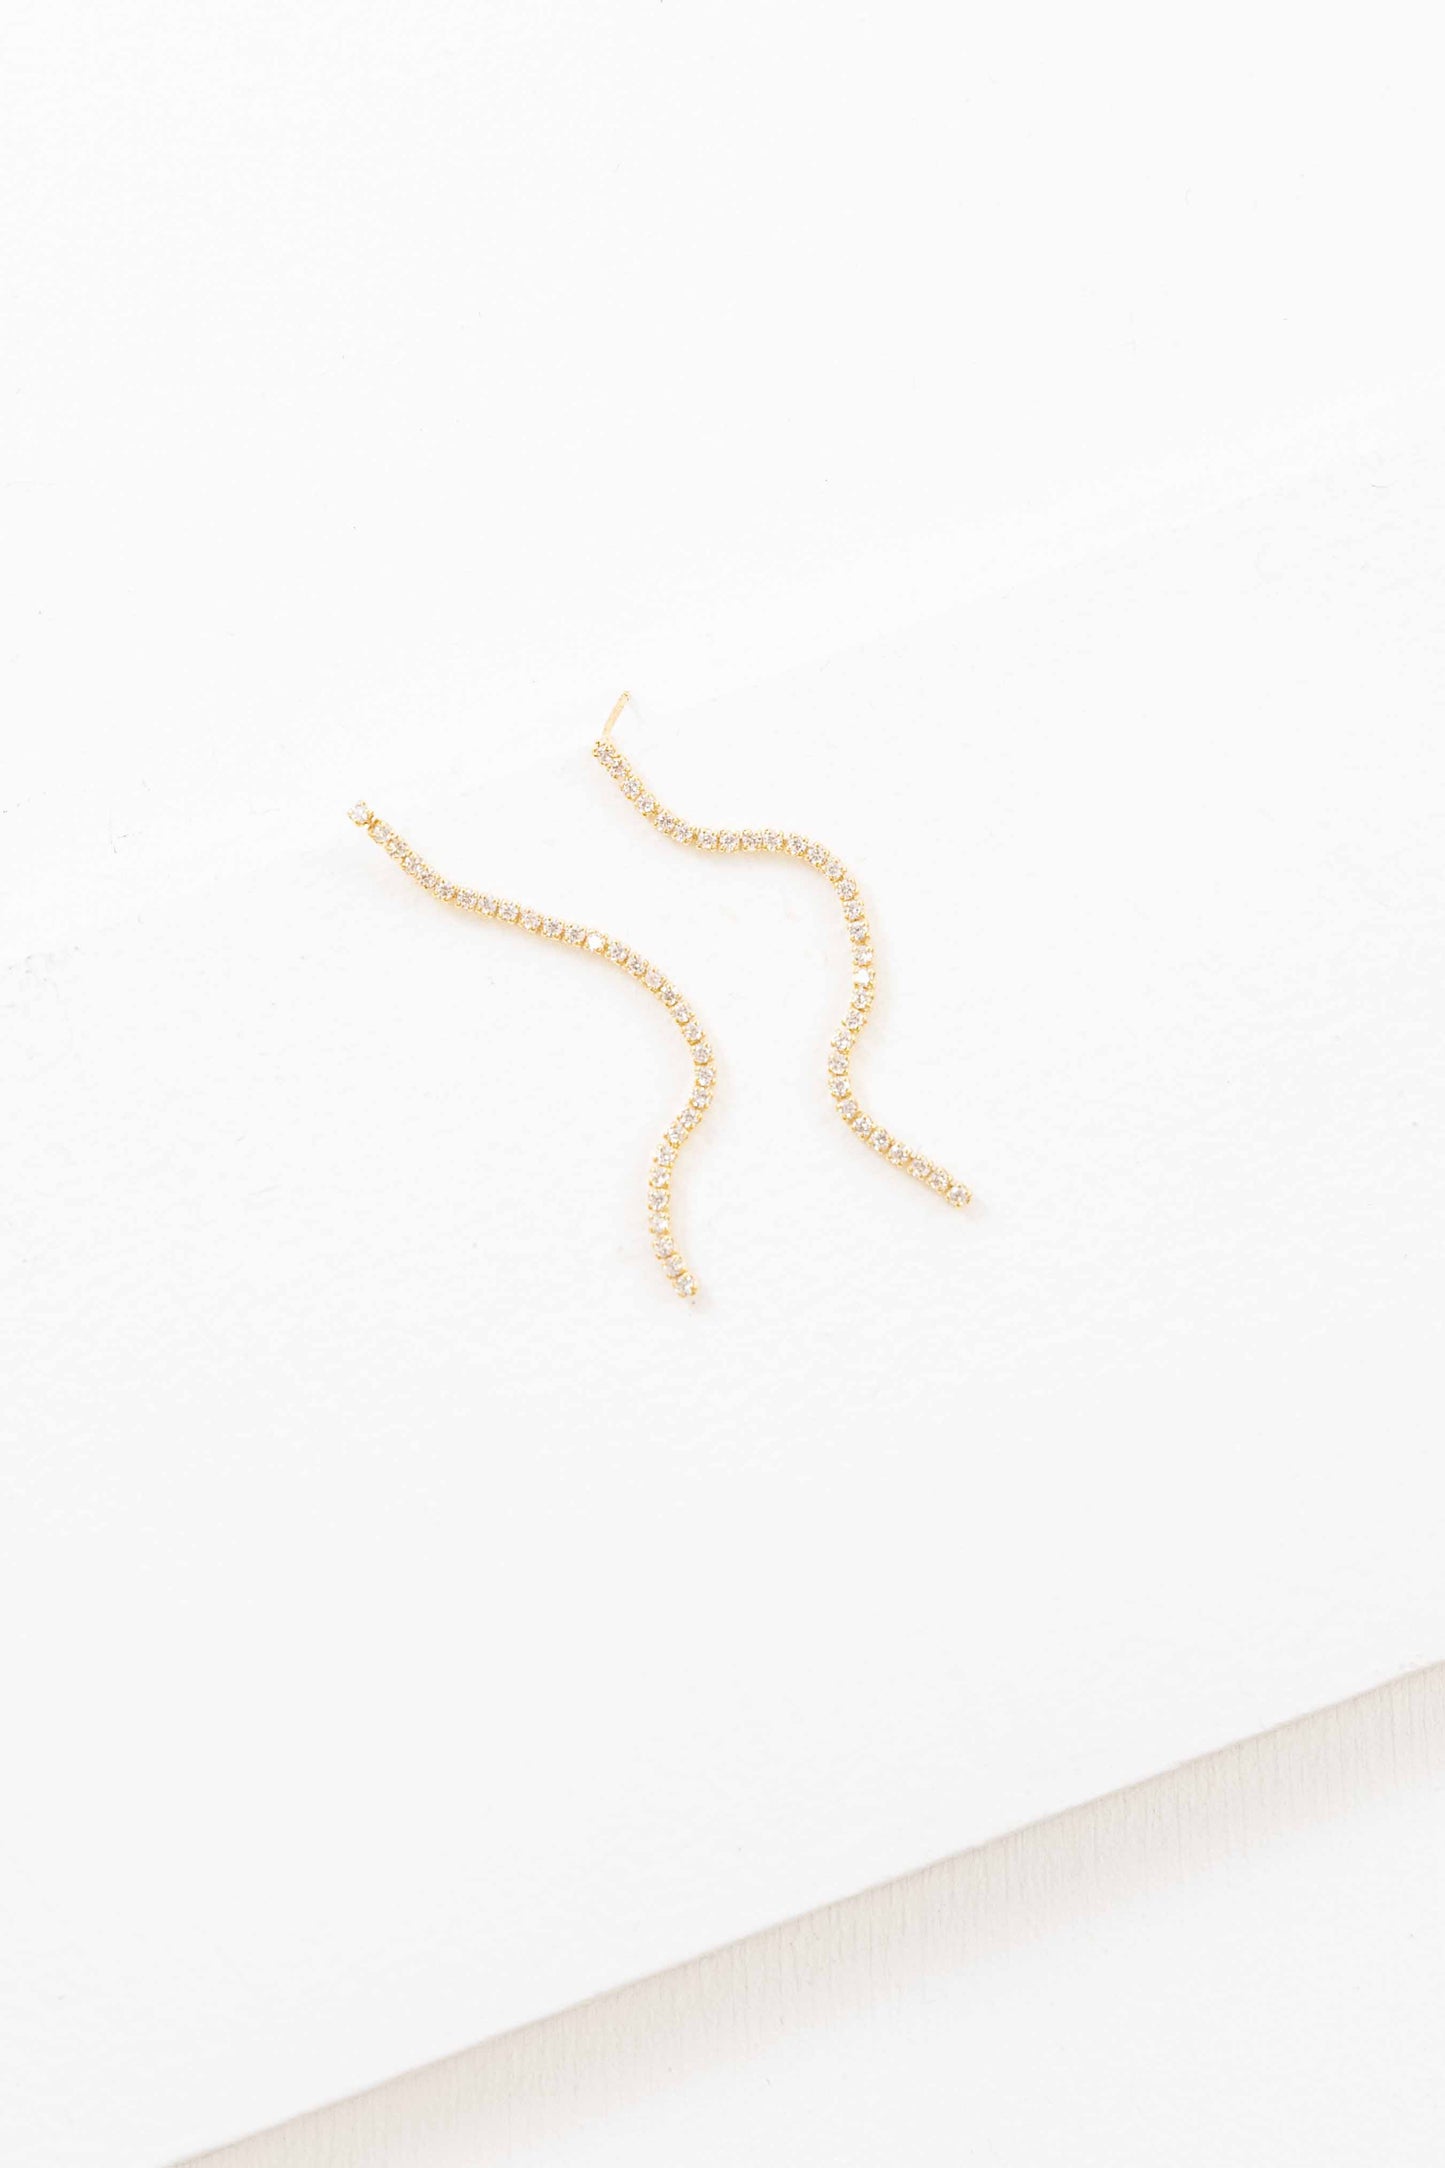 Airs and Graces Dangle Earrings | Gold (18K)